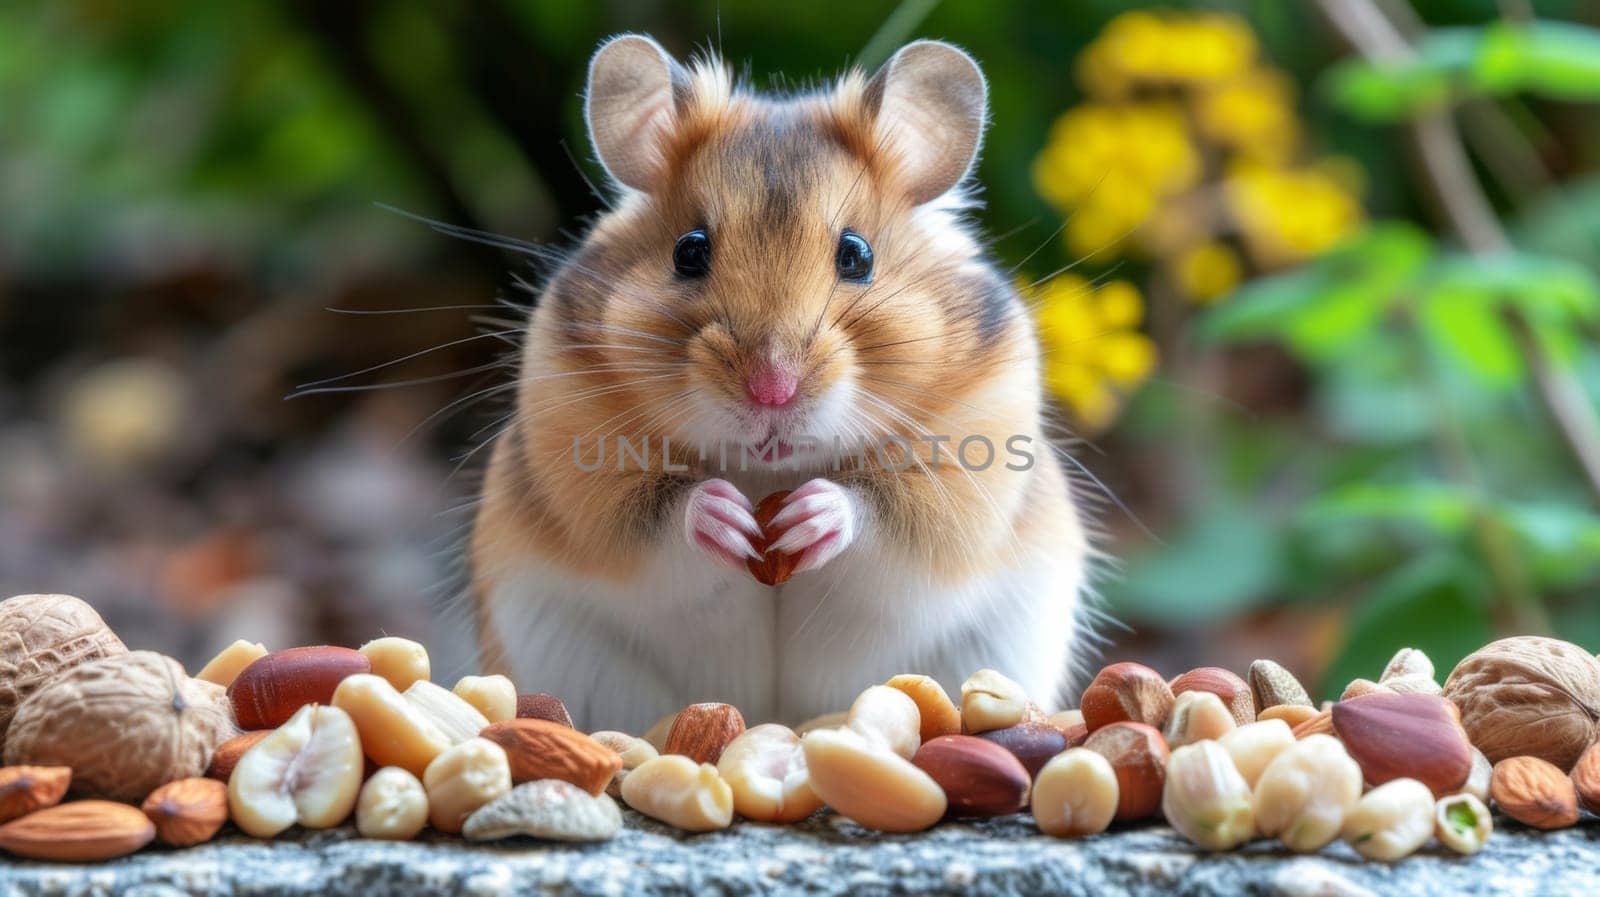 A hamster eating nuts and seeds in a garden setting